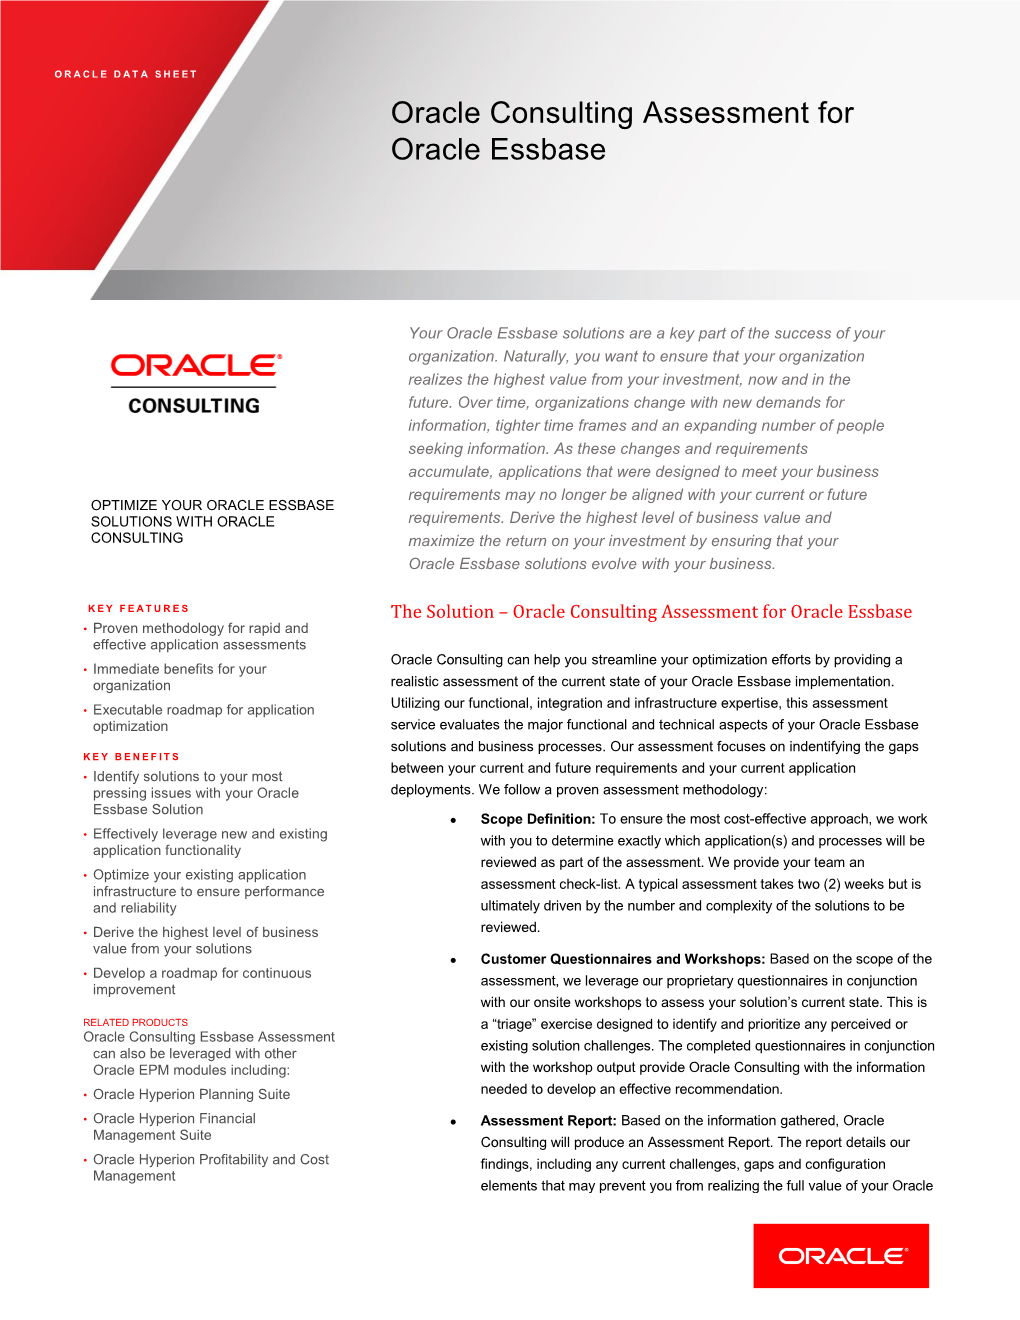 Oracle Consulting Assessment for Oracle Essbase